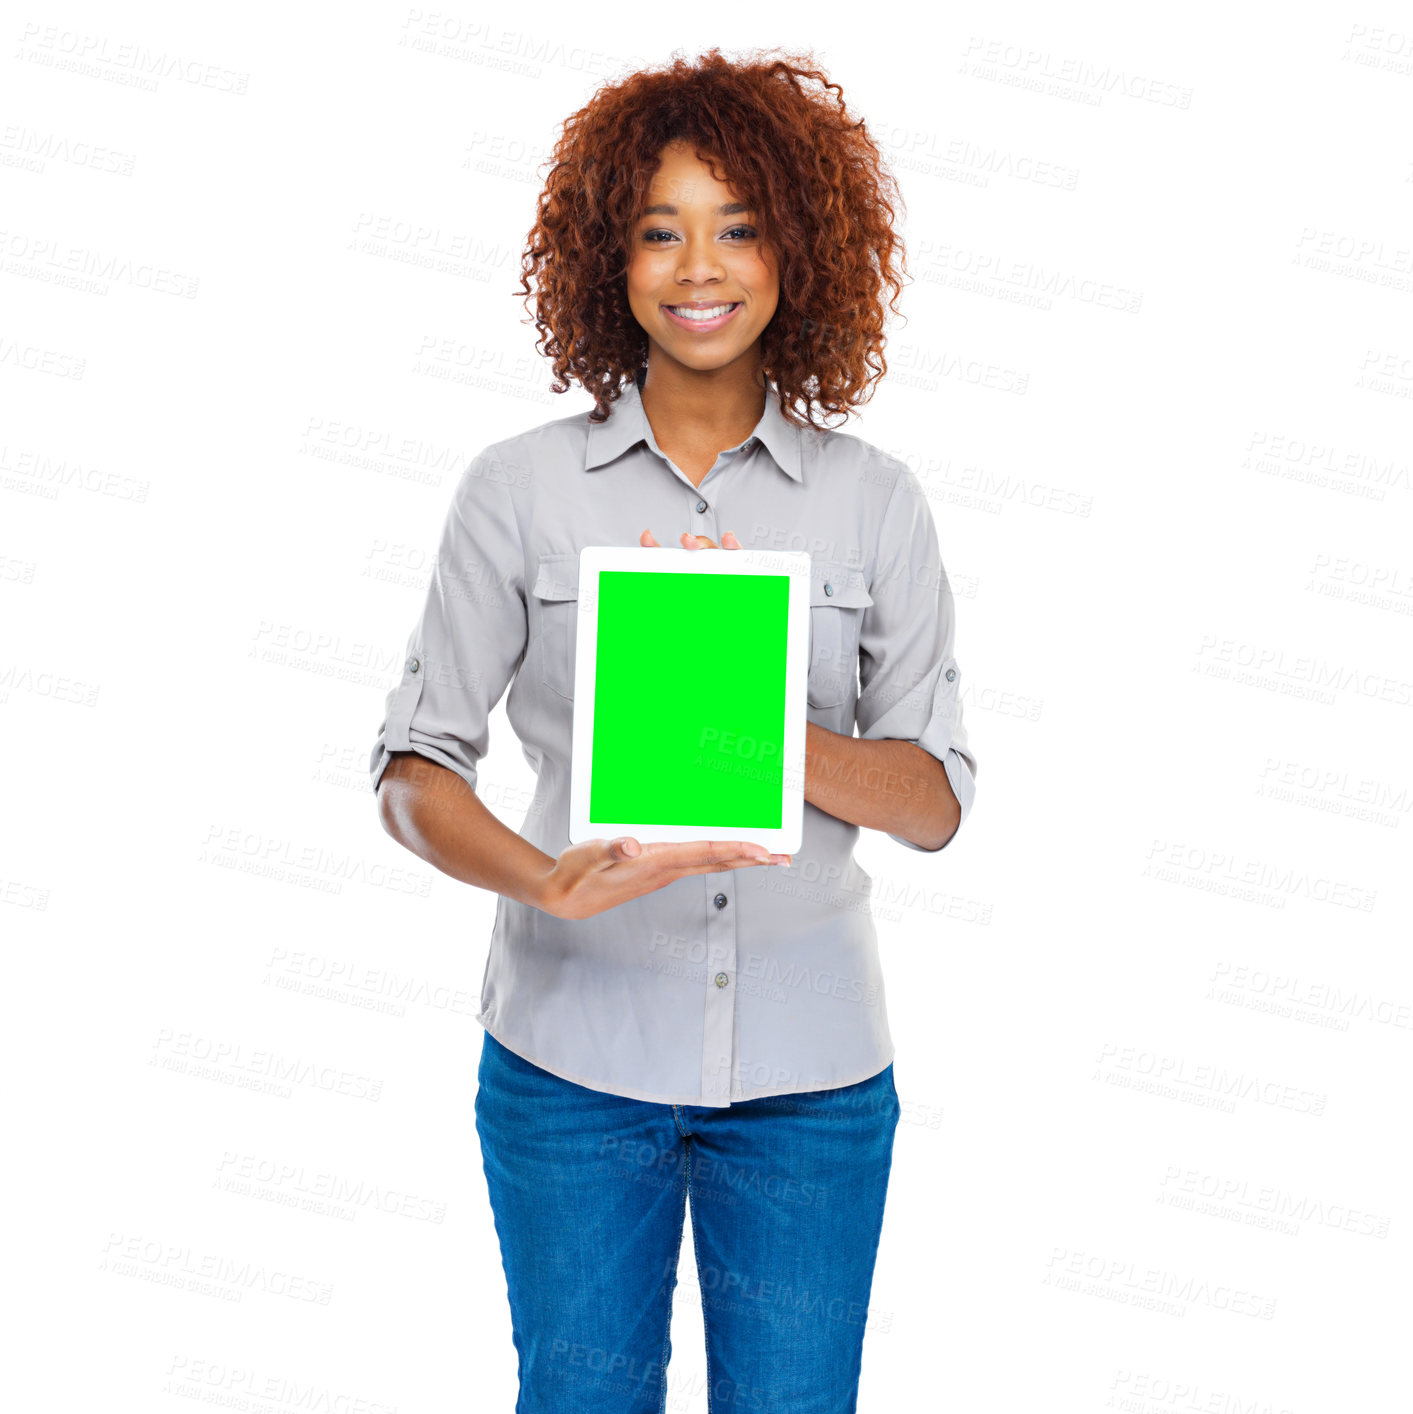 Buy stock photo Shot of a young woman using a digital tablet isolated on white